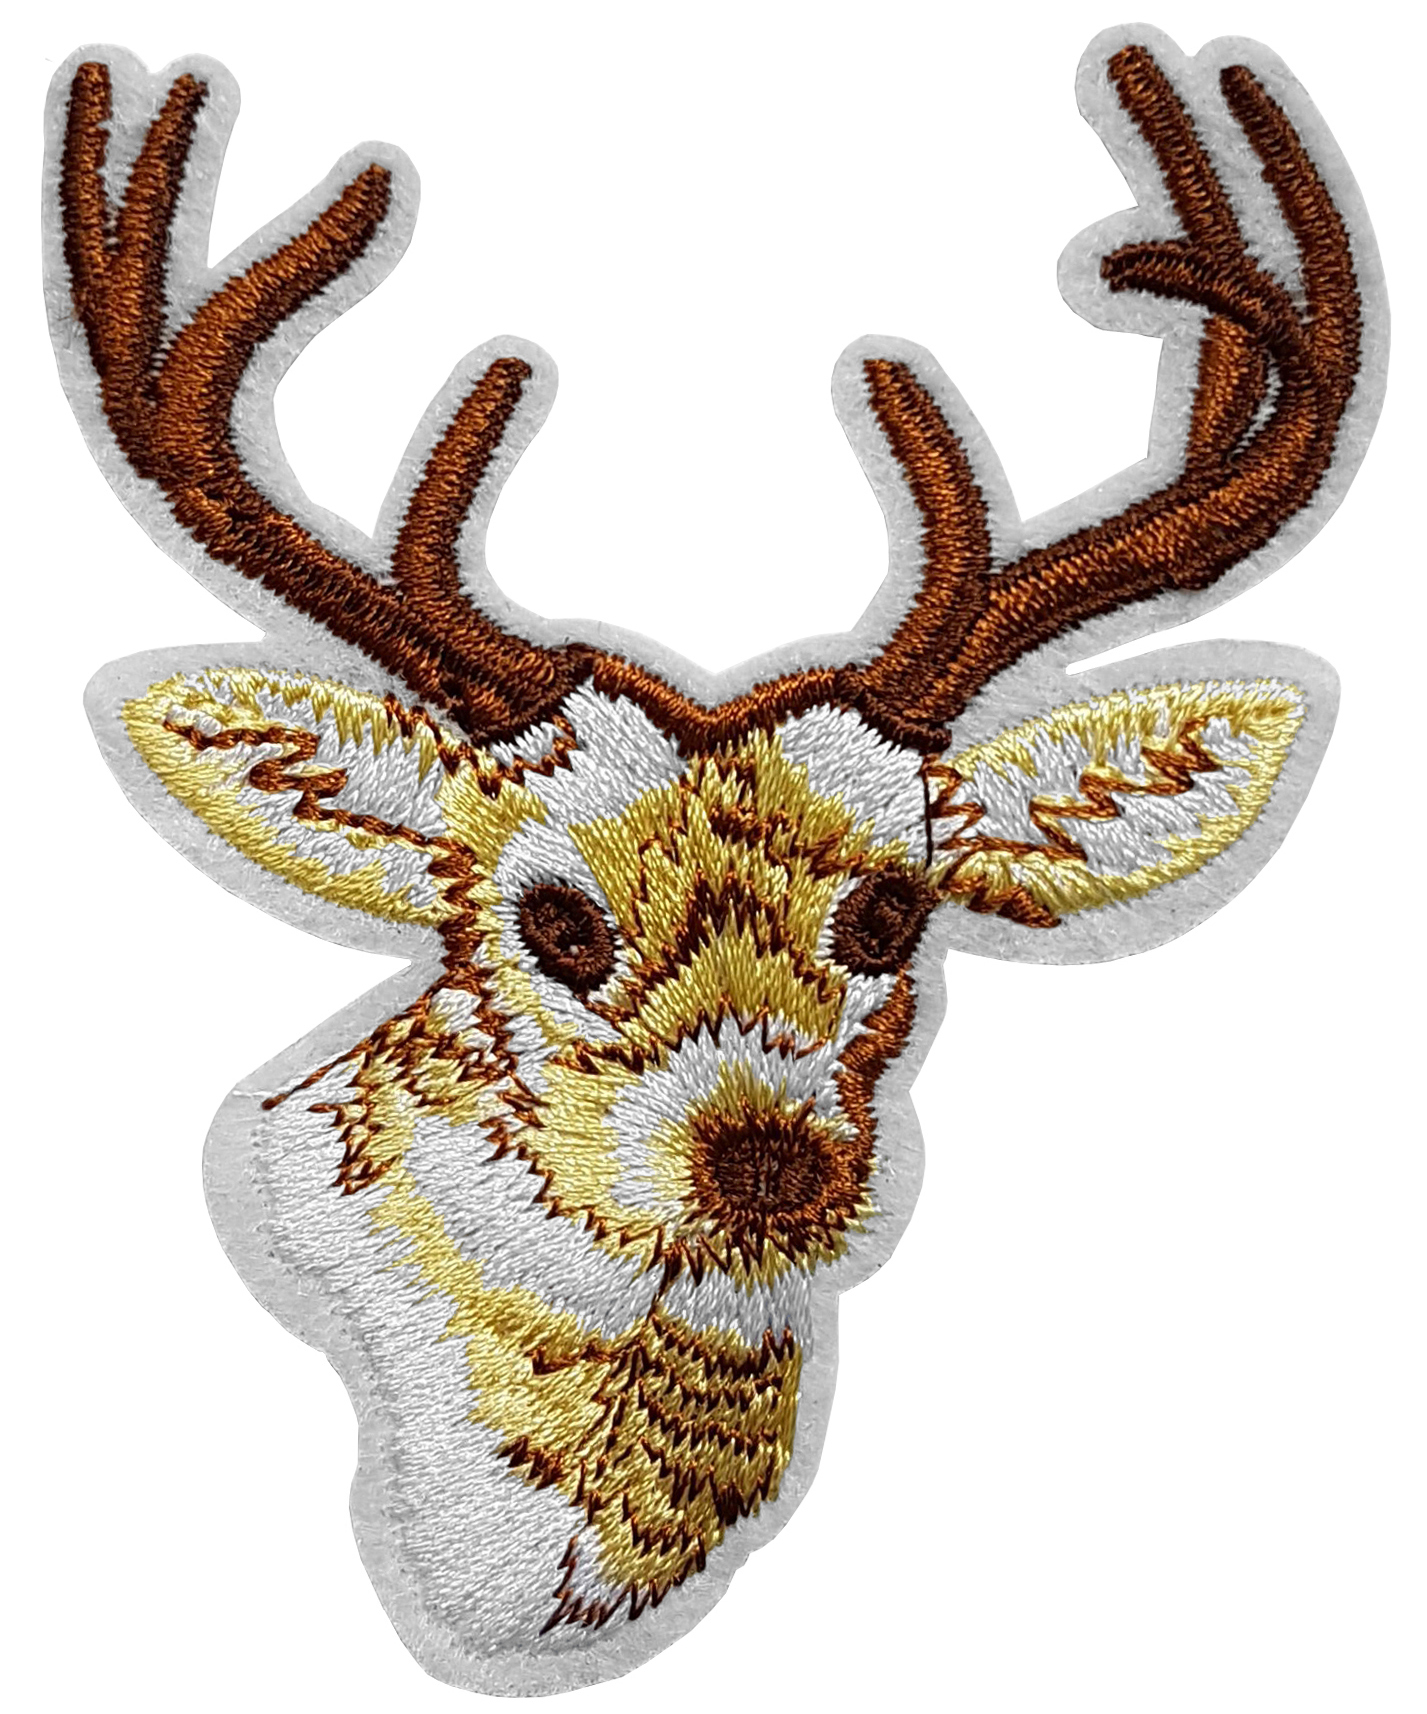 Patch thermocollant cerf bois 1